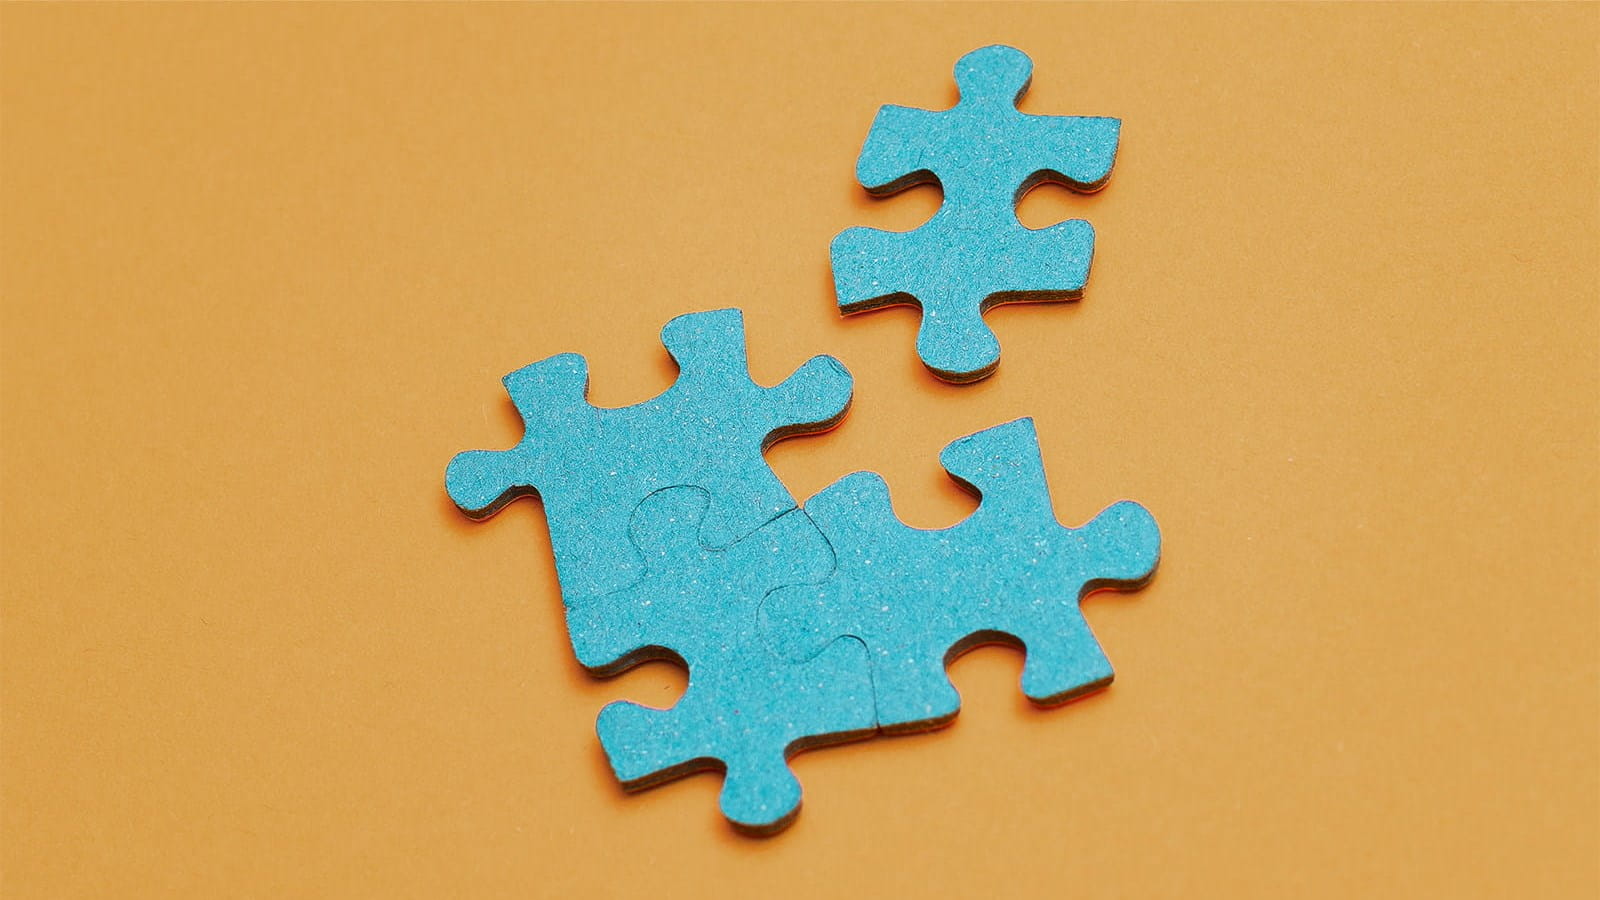 jigsaw pieces green teal orange ICAEW By All Accounts IFRS S1 S2